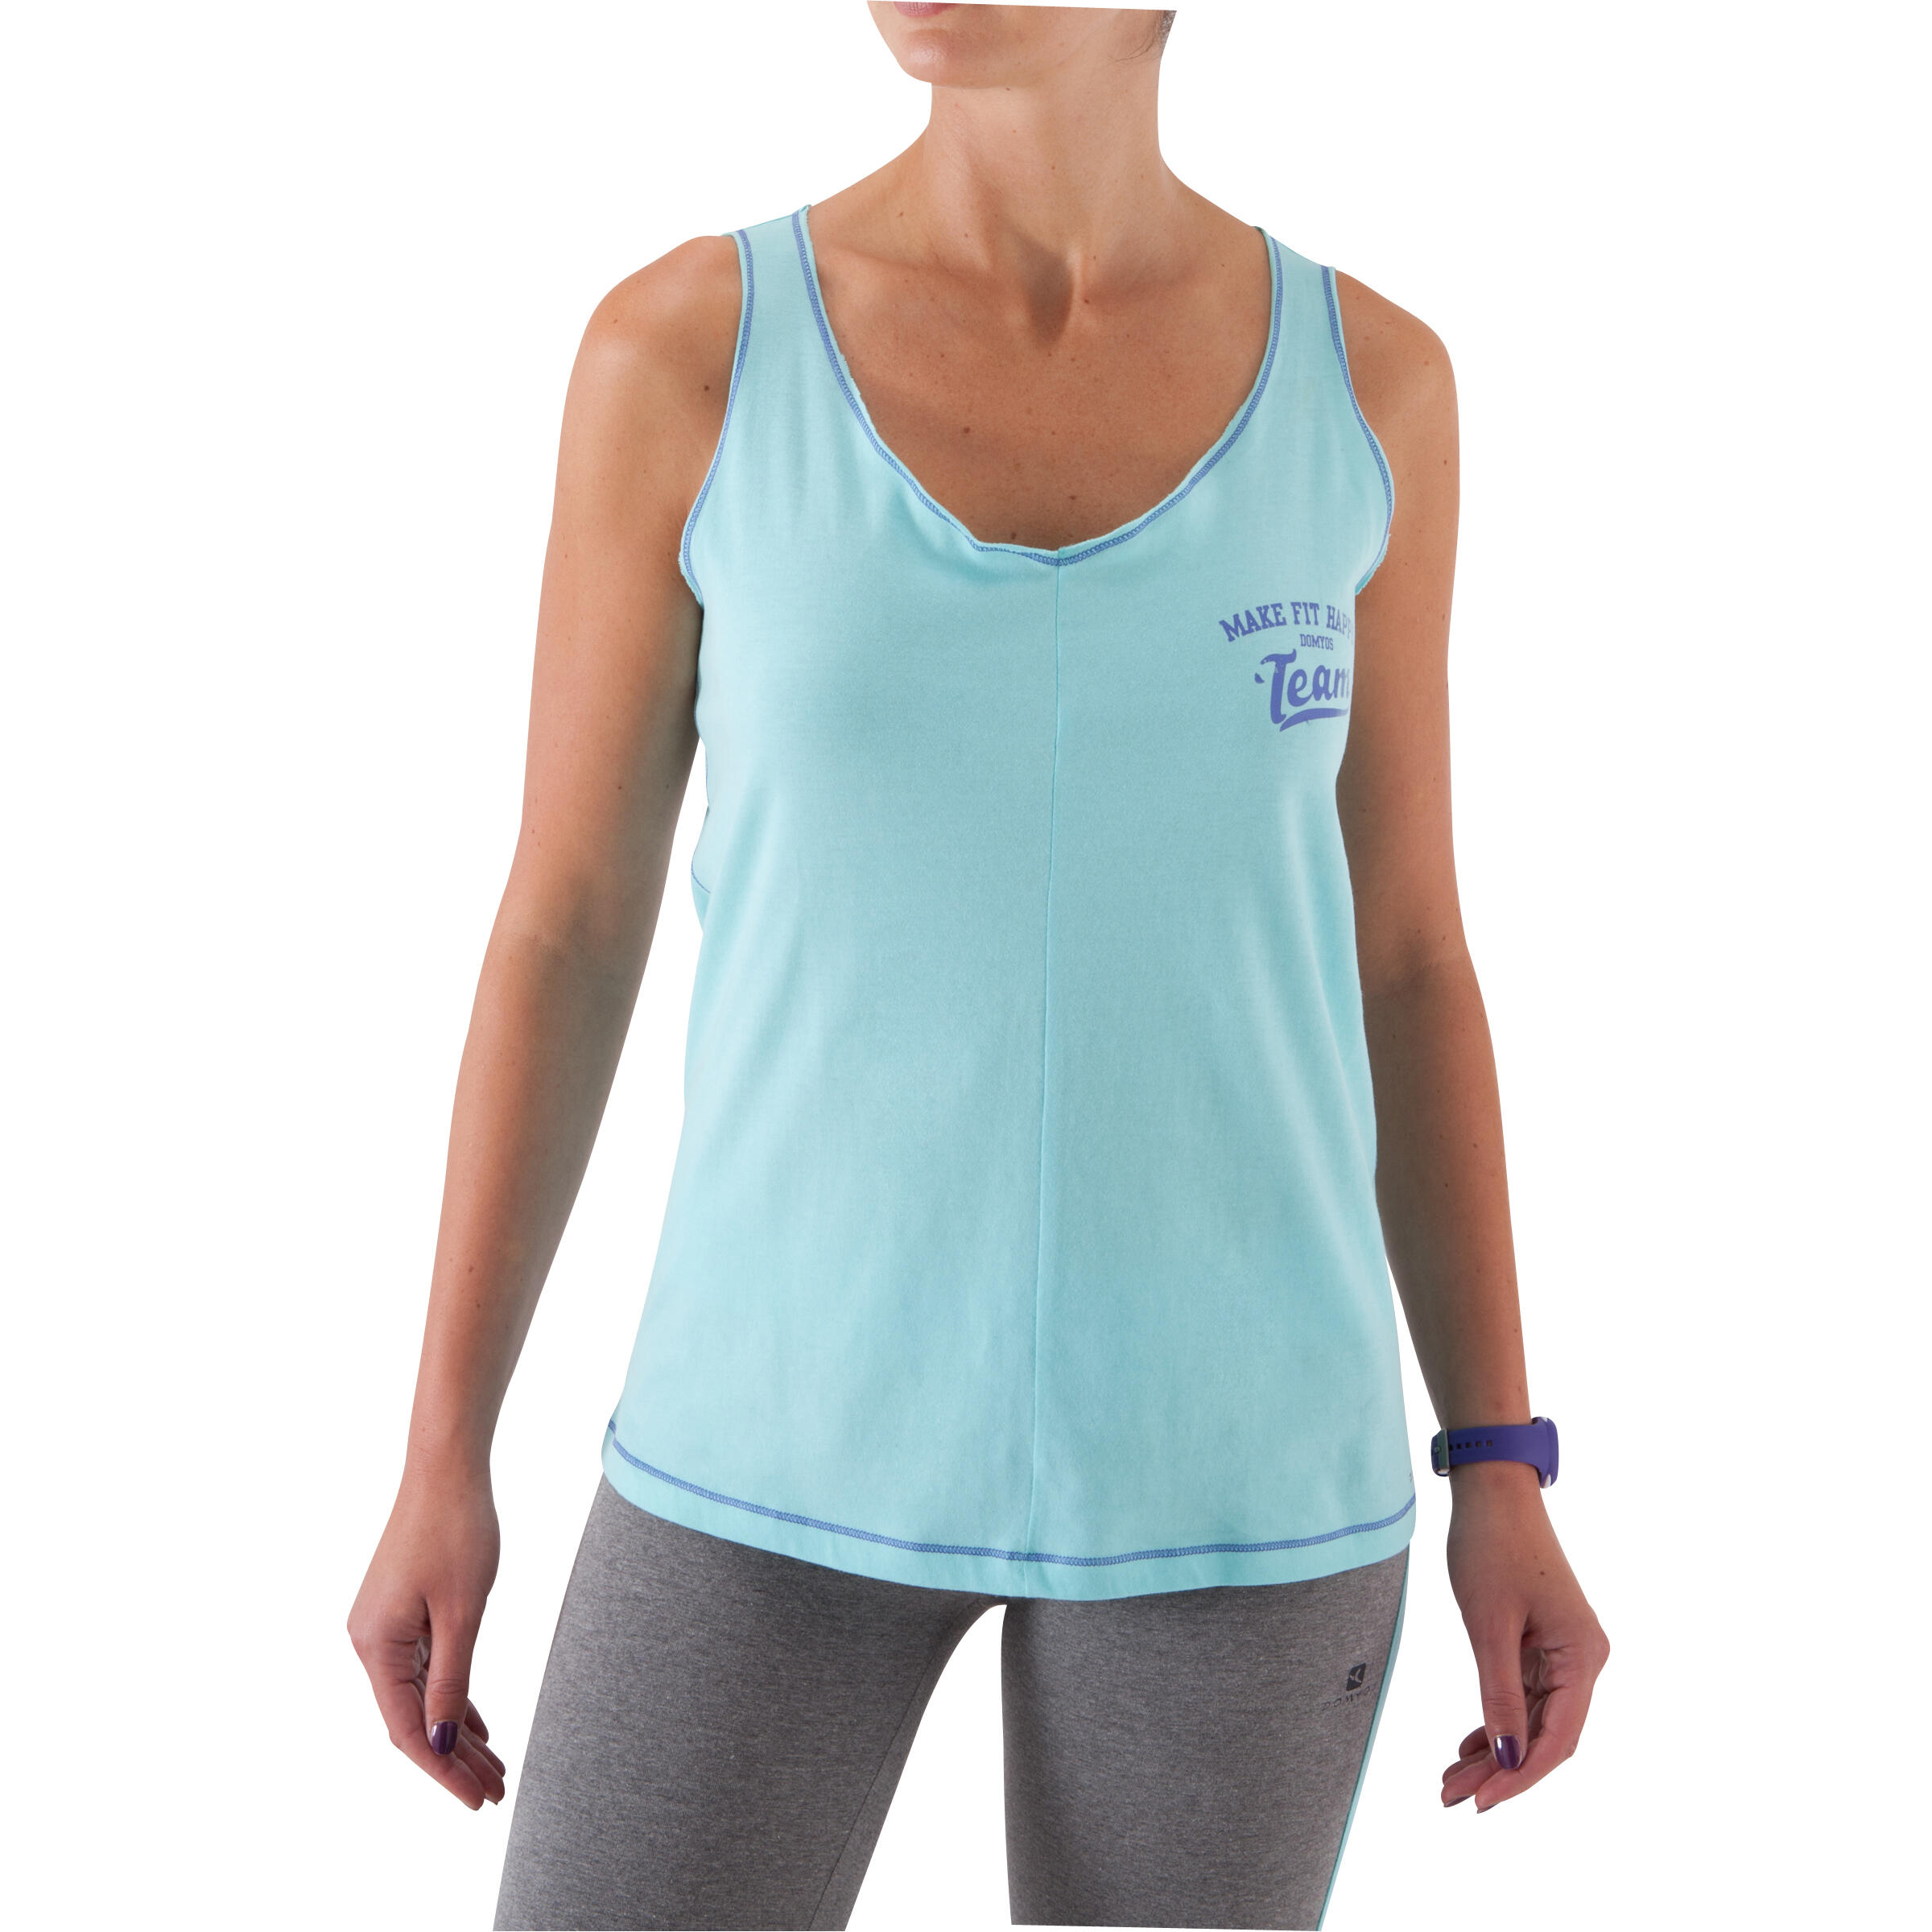 Women's Fitness Tank Top - Turquoise 3/12